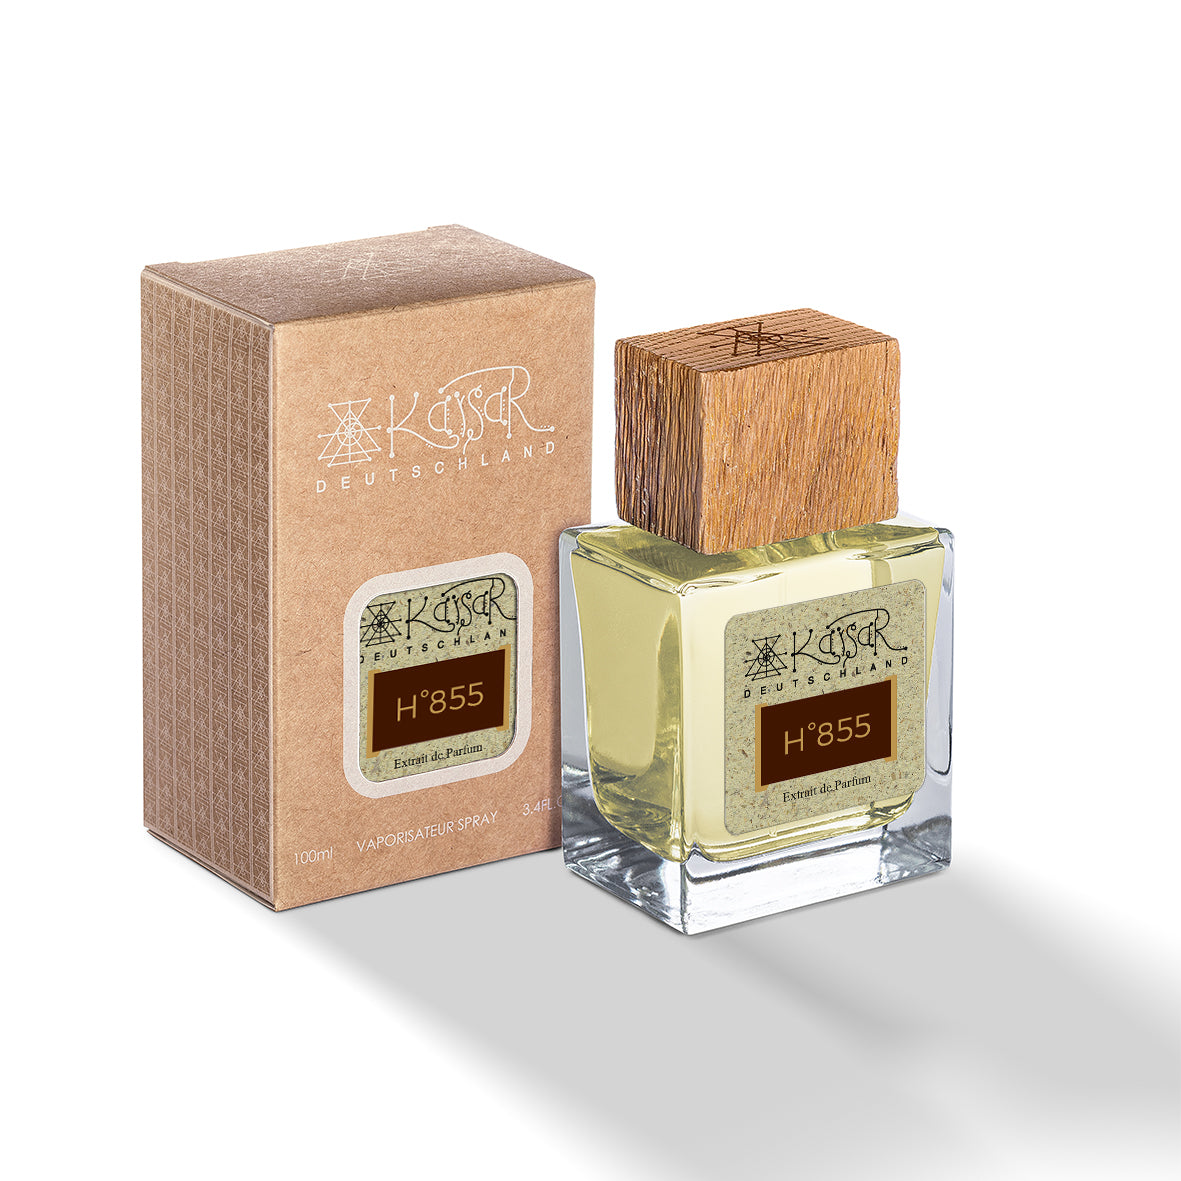 H°855 The One Royal Night Scent